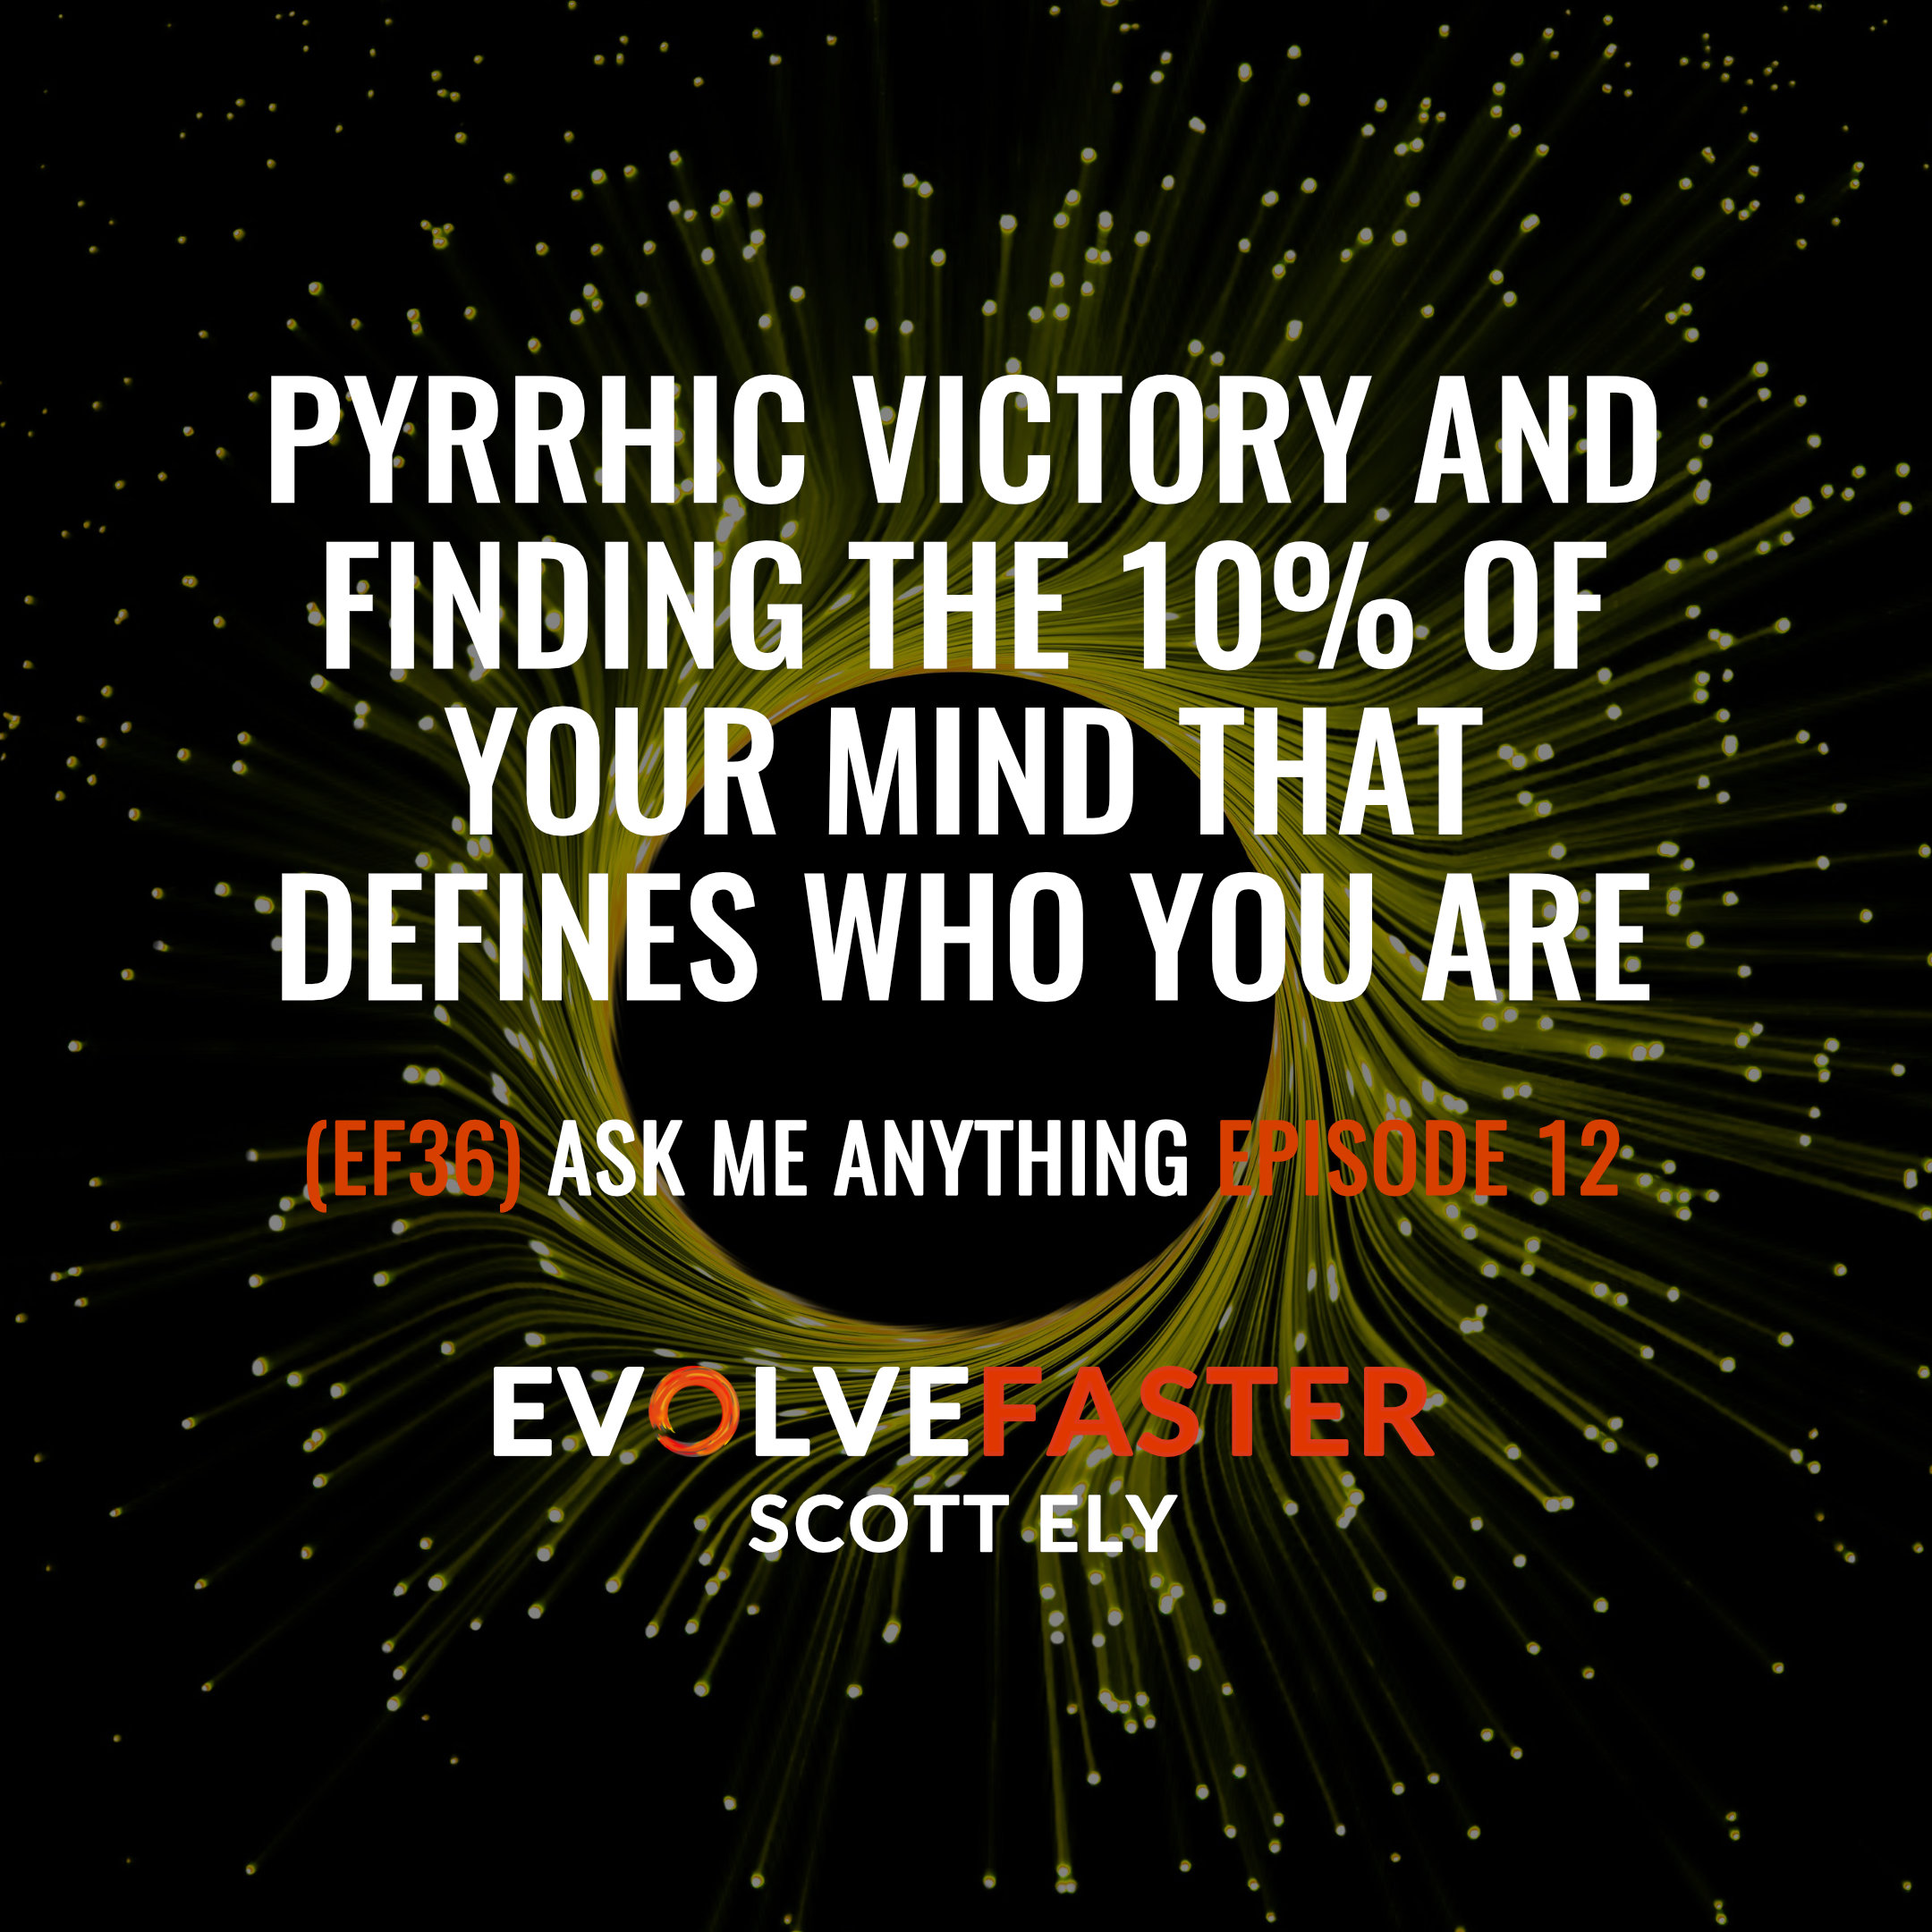 (EF36) AMA-EF12: Pyrrhic Victory and Finding the 10% of Your Mind that Defines Who You Are Ask Me Anything for Episode EF12